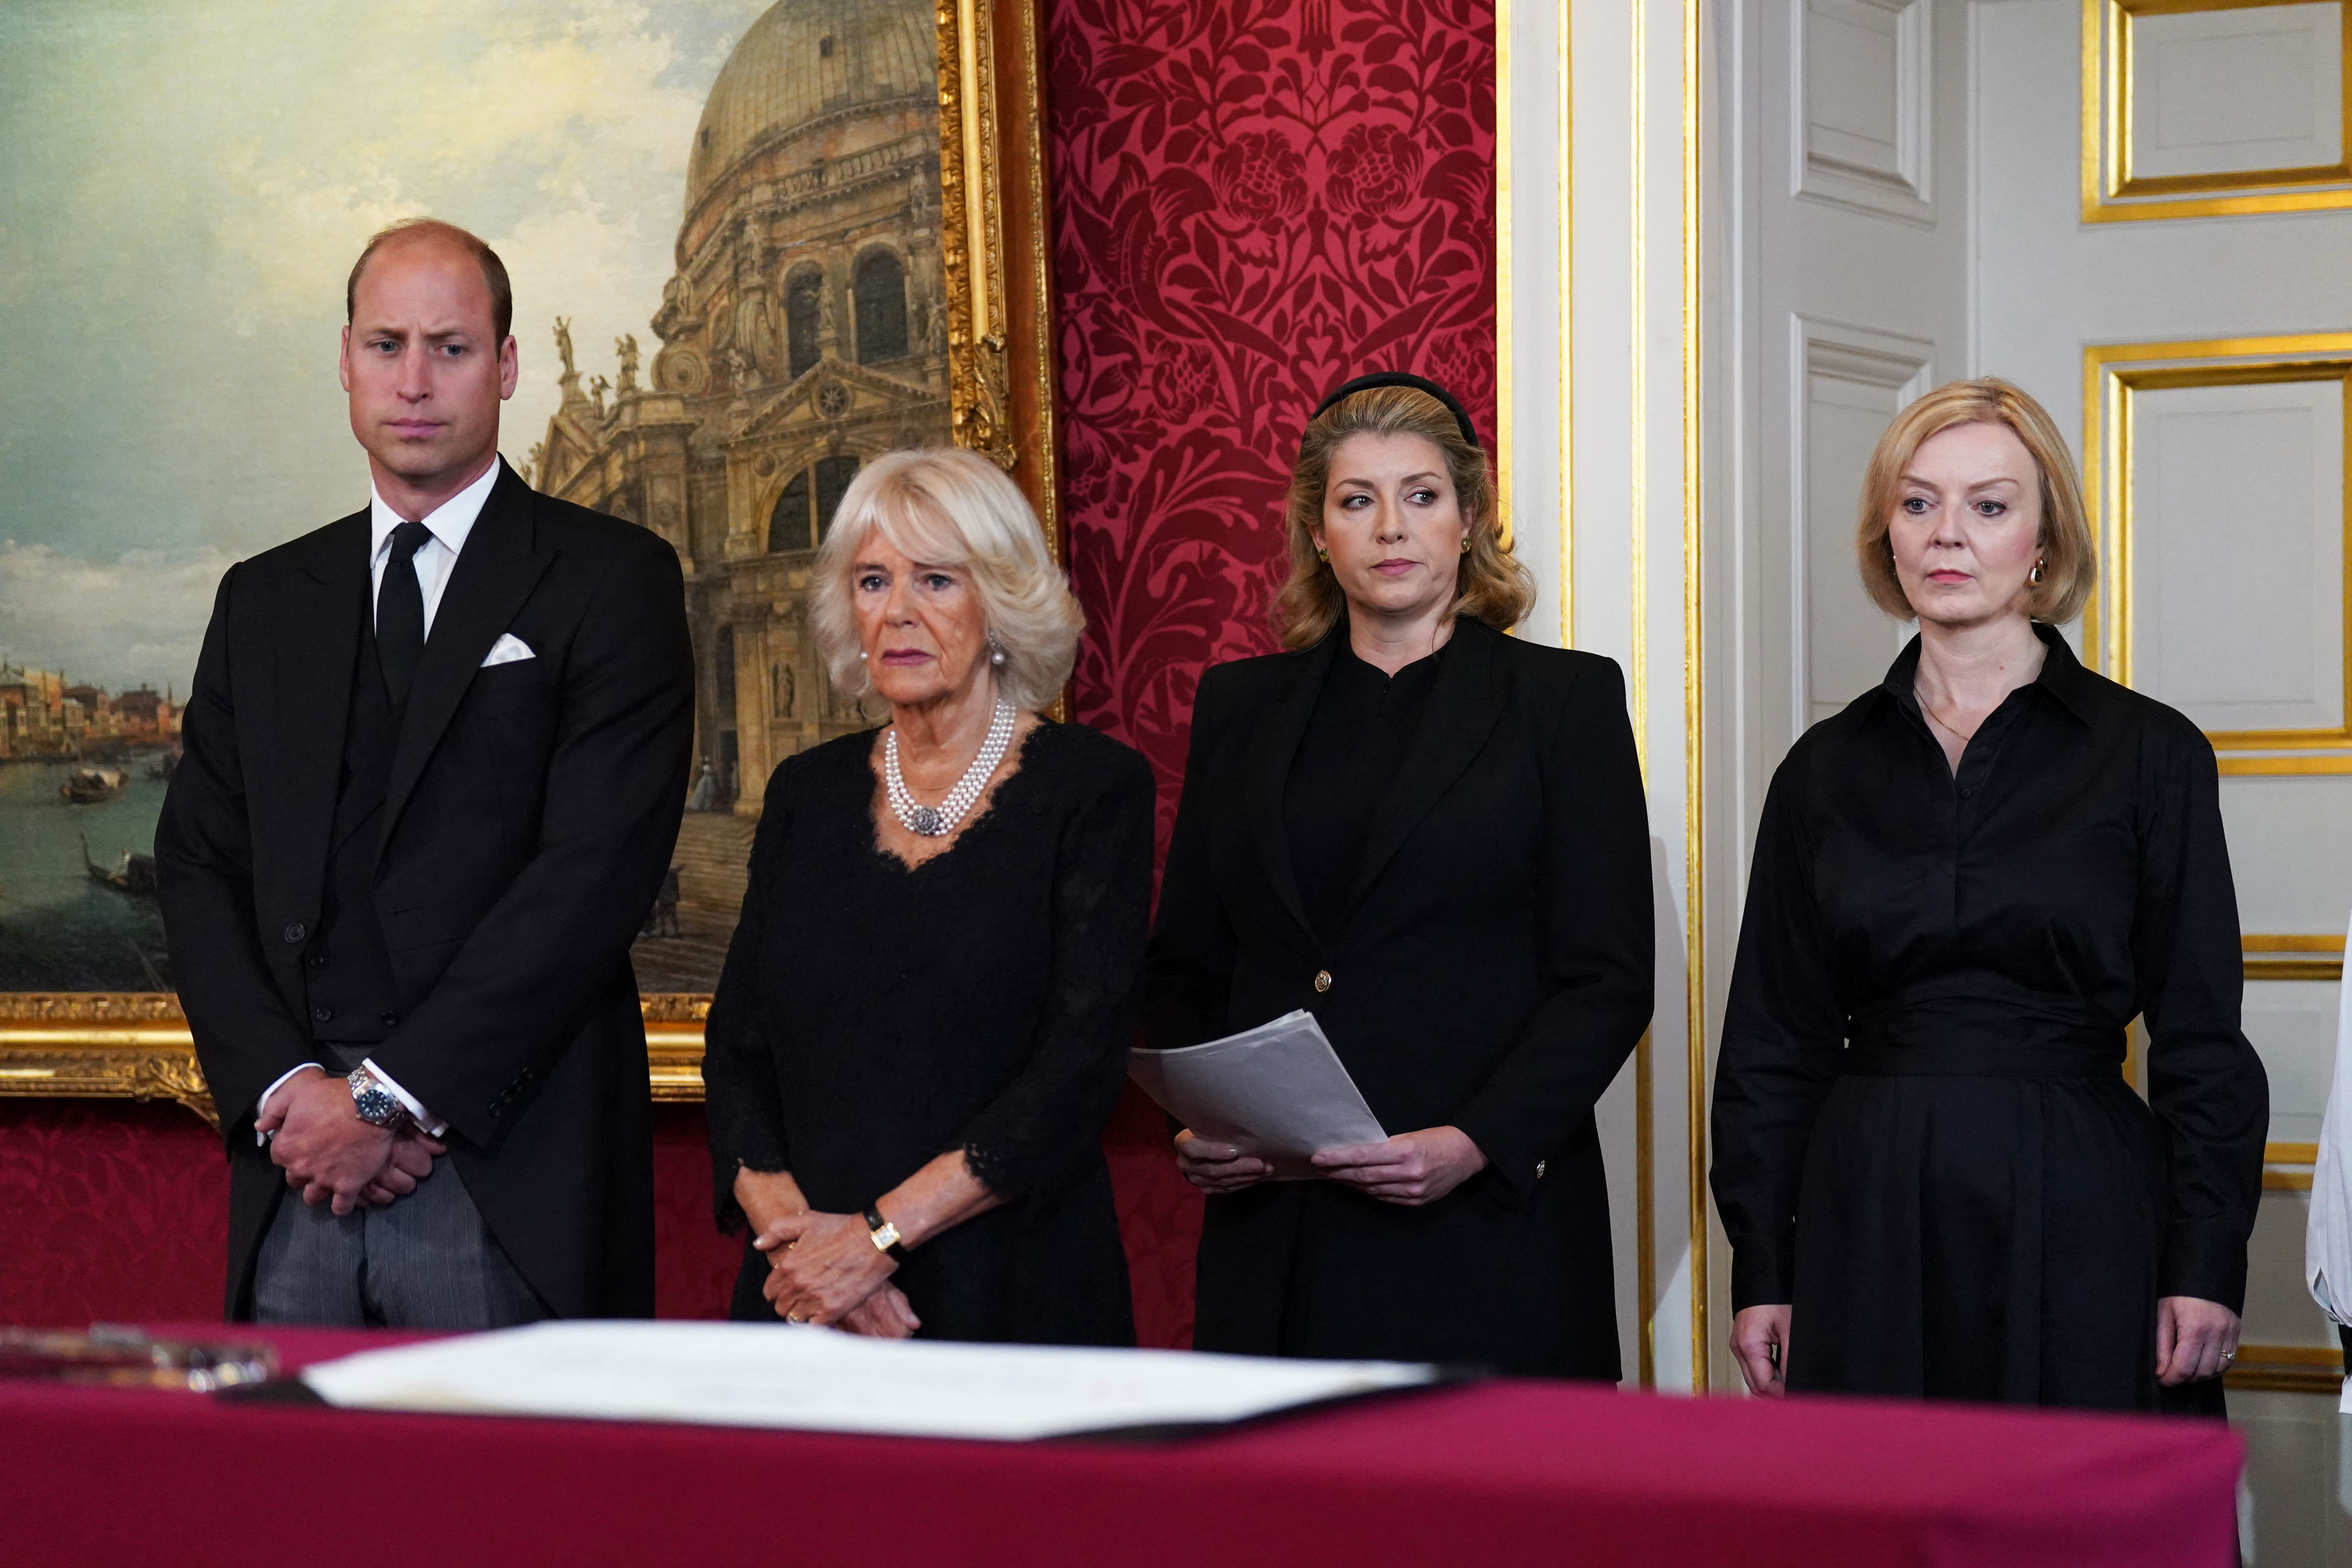 <p>With serious looks on their faces, newly titled <a href="https://www.wonderwall.com/celebrity/profiles/overview/prince-william-482.article">Prince William</a>, now the Prince of Wales, and Camilla, Queen Consort stood next to Lord President of the Council Penny Mordaunt and Britain's Prime Minister Liz Truss during the meeting of the Accession Council inside St. James's Palace in London on Sept. 10, 2022, to officially proclaim King Charles III as the new monarch. <a href="https://www.youtube.com/watch?v=f7DJKGP-Zy8">Sky News</a> reported that this is the first time women have attended the Accession Council, which last met 70 years ago. </p>